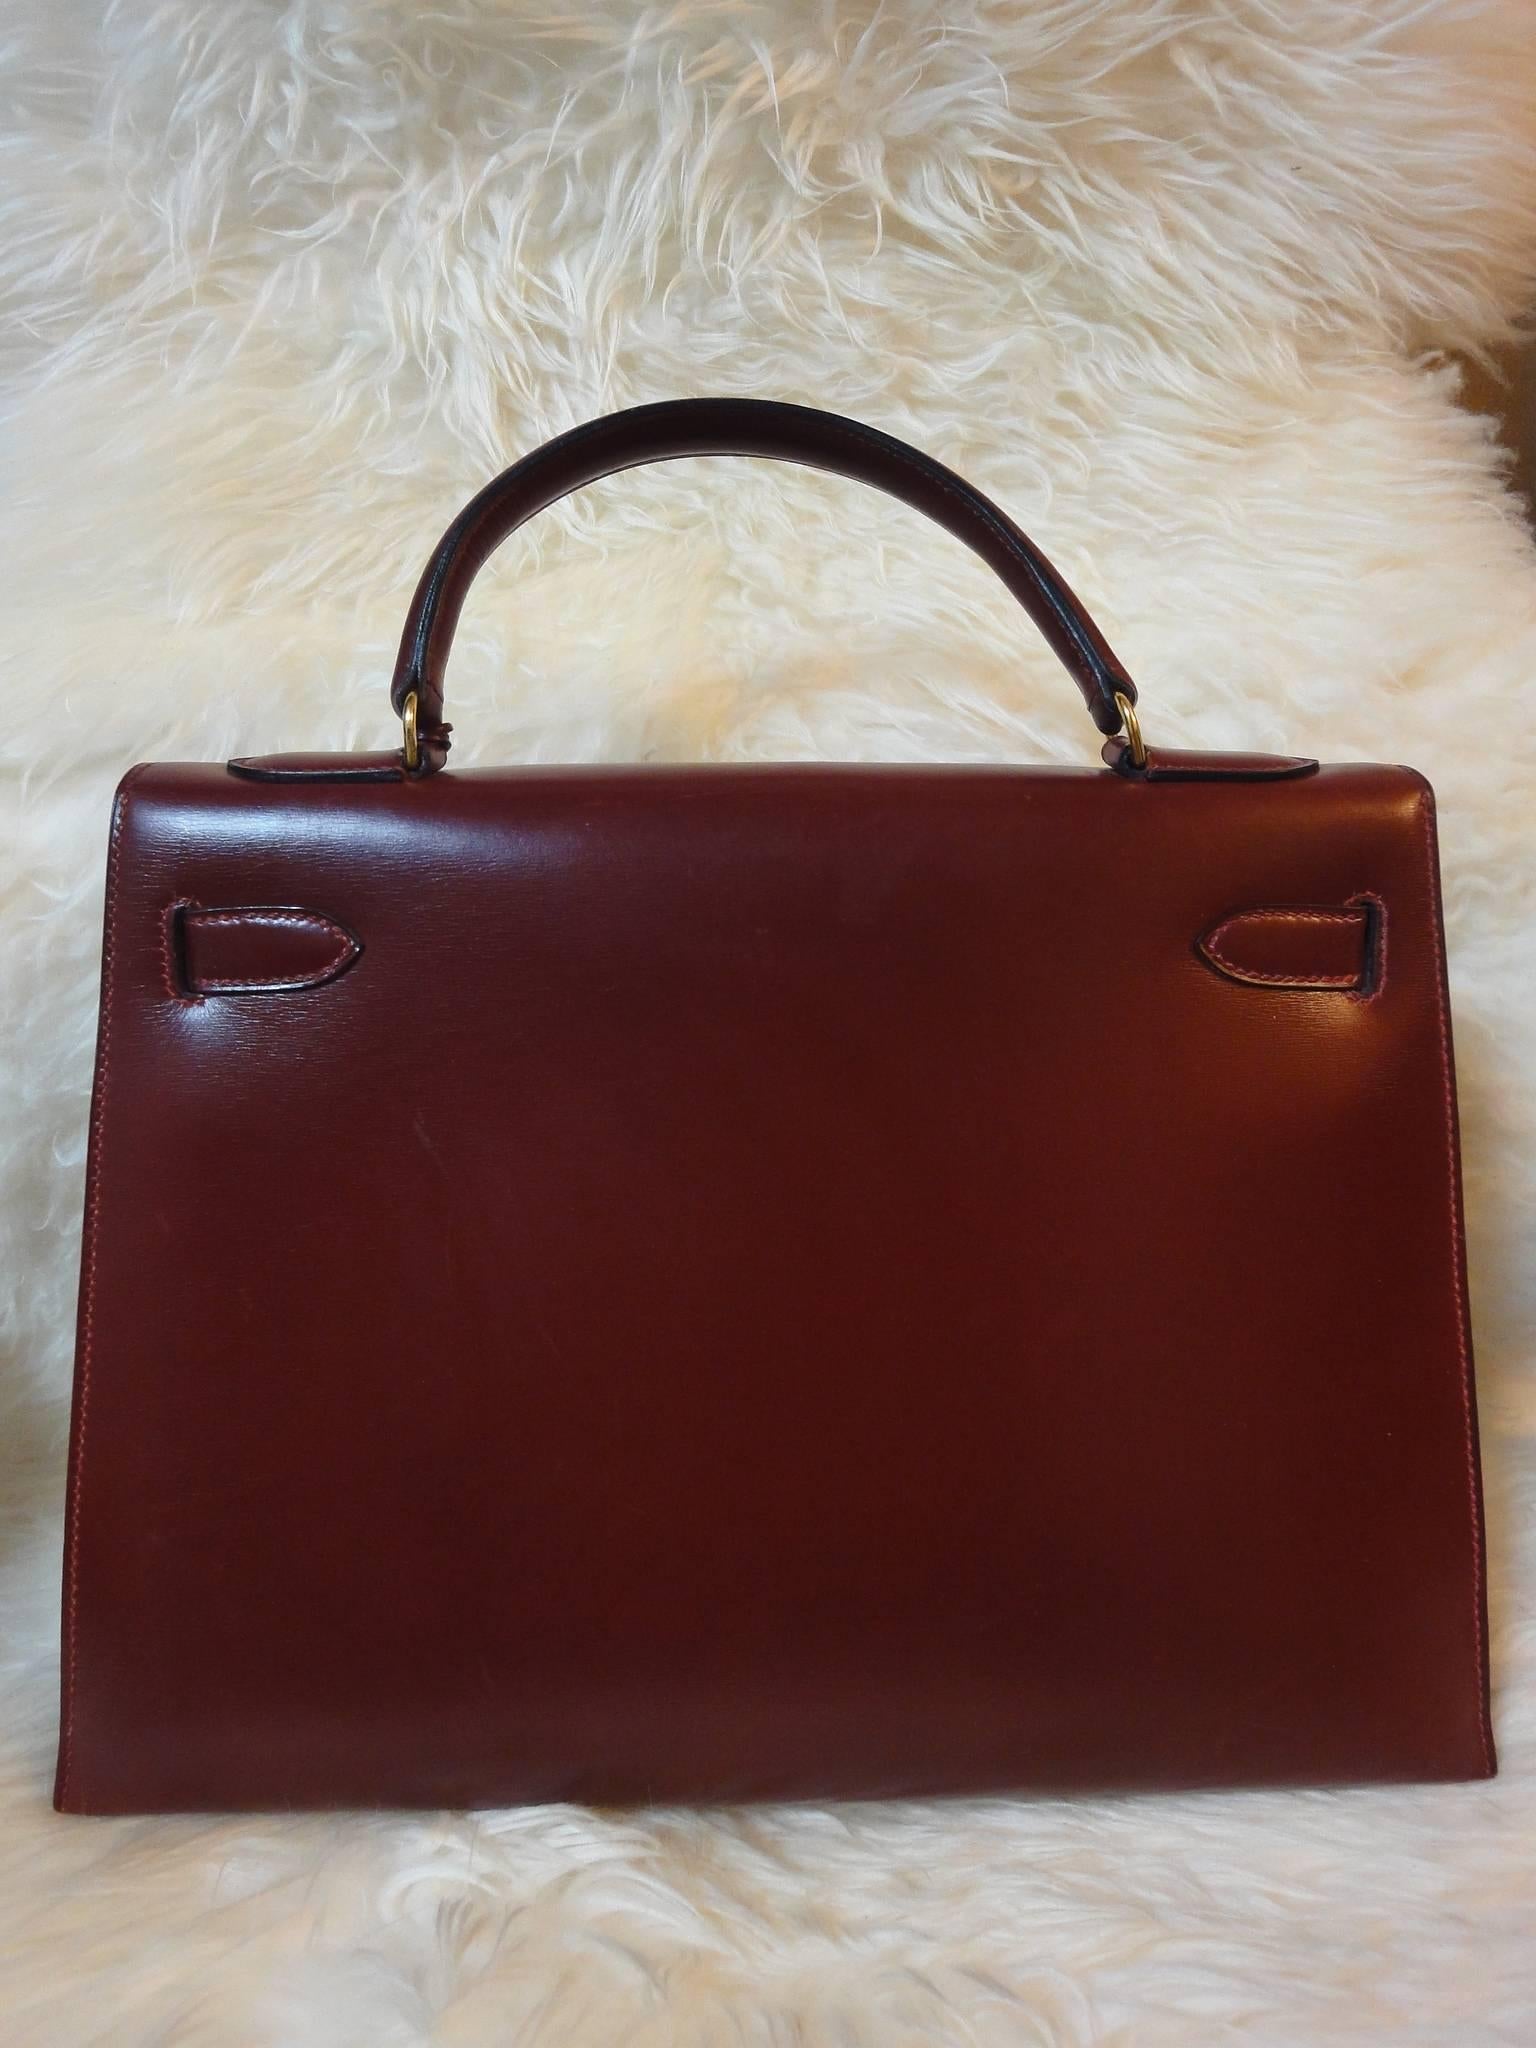 1980s Vintage HERMES Kelly 32 bag rouge ash box calf leather with gold hardware. Exterior stitch. Stamp K in O, 1981. Best known classic bag

This is one of the oldest vintage HERMES Kelly bags from 1981 with the ECLAIR zipper in the interior